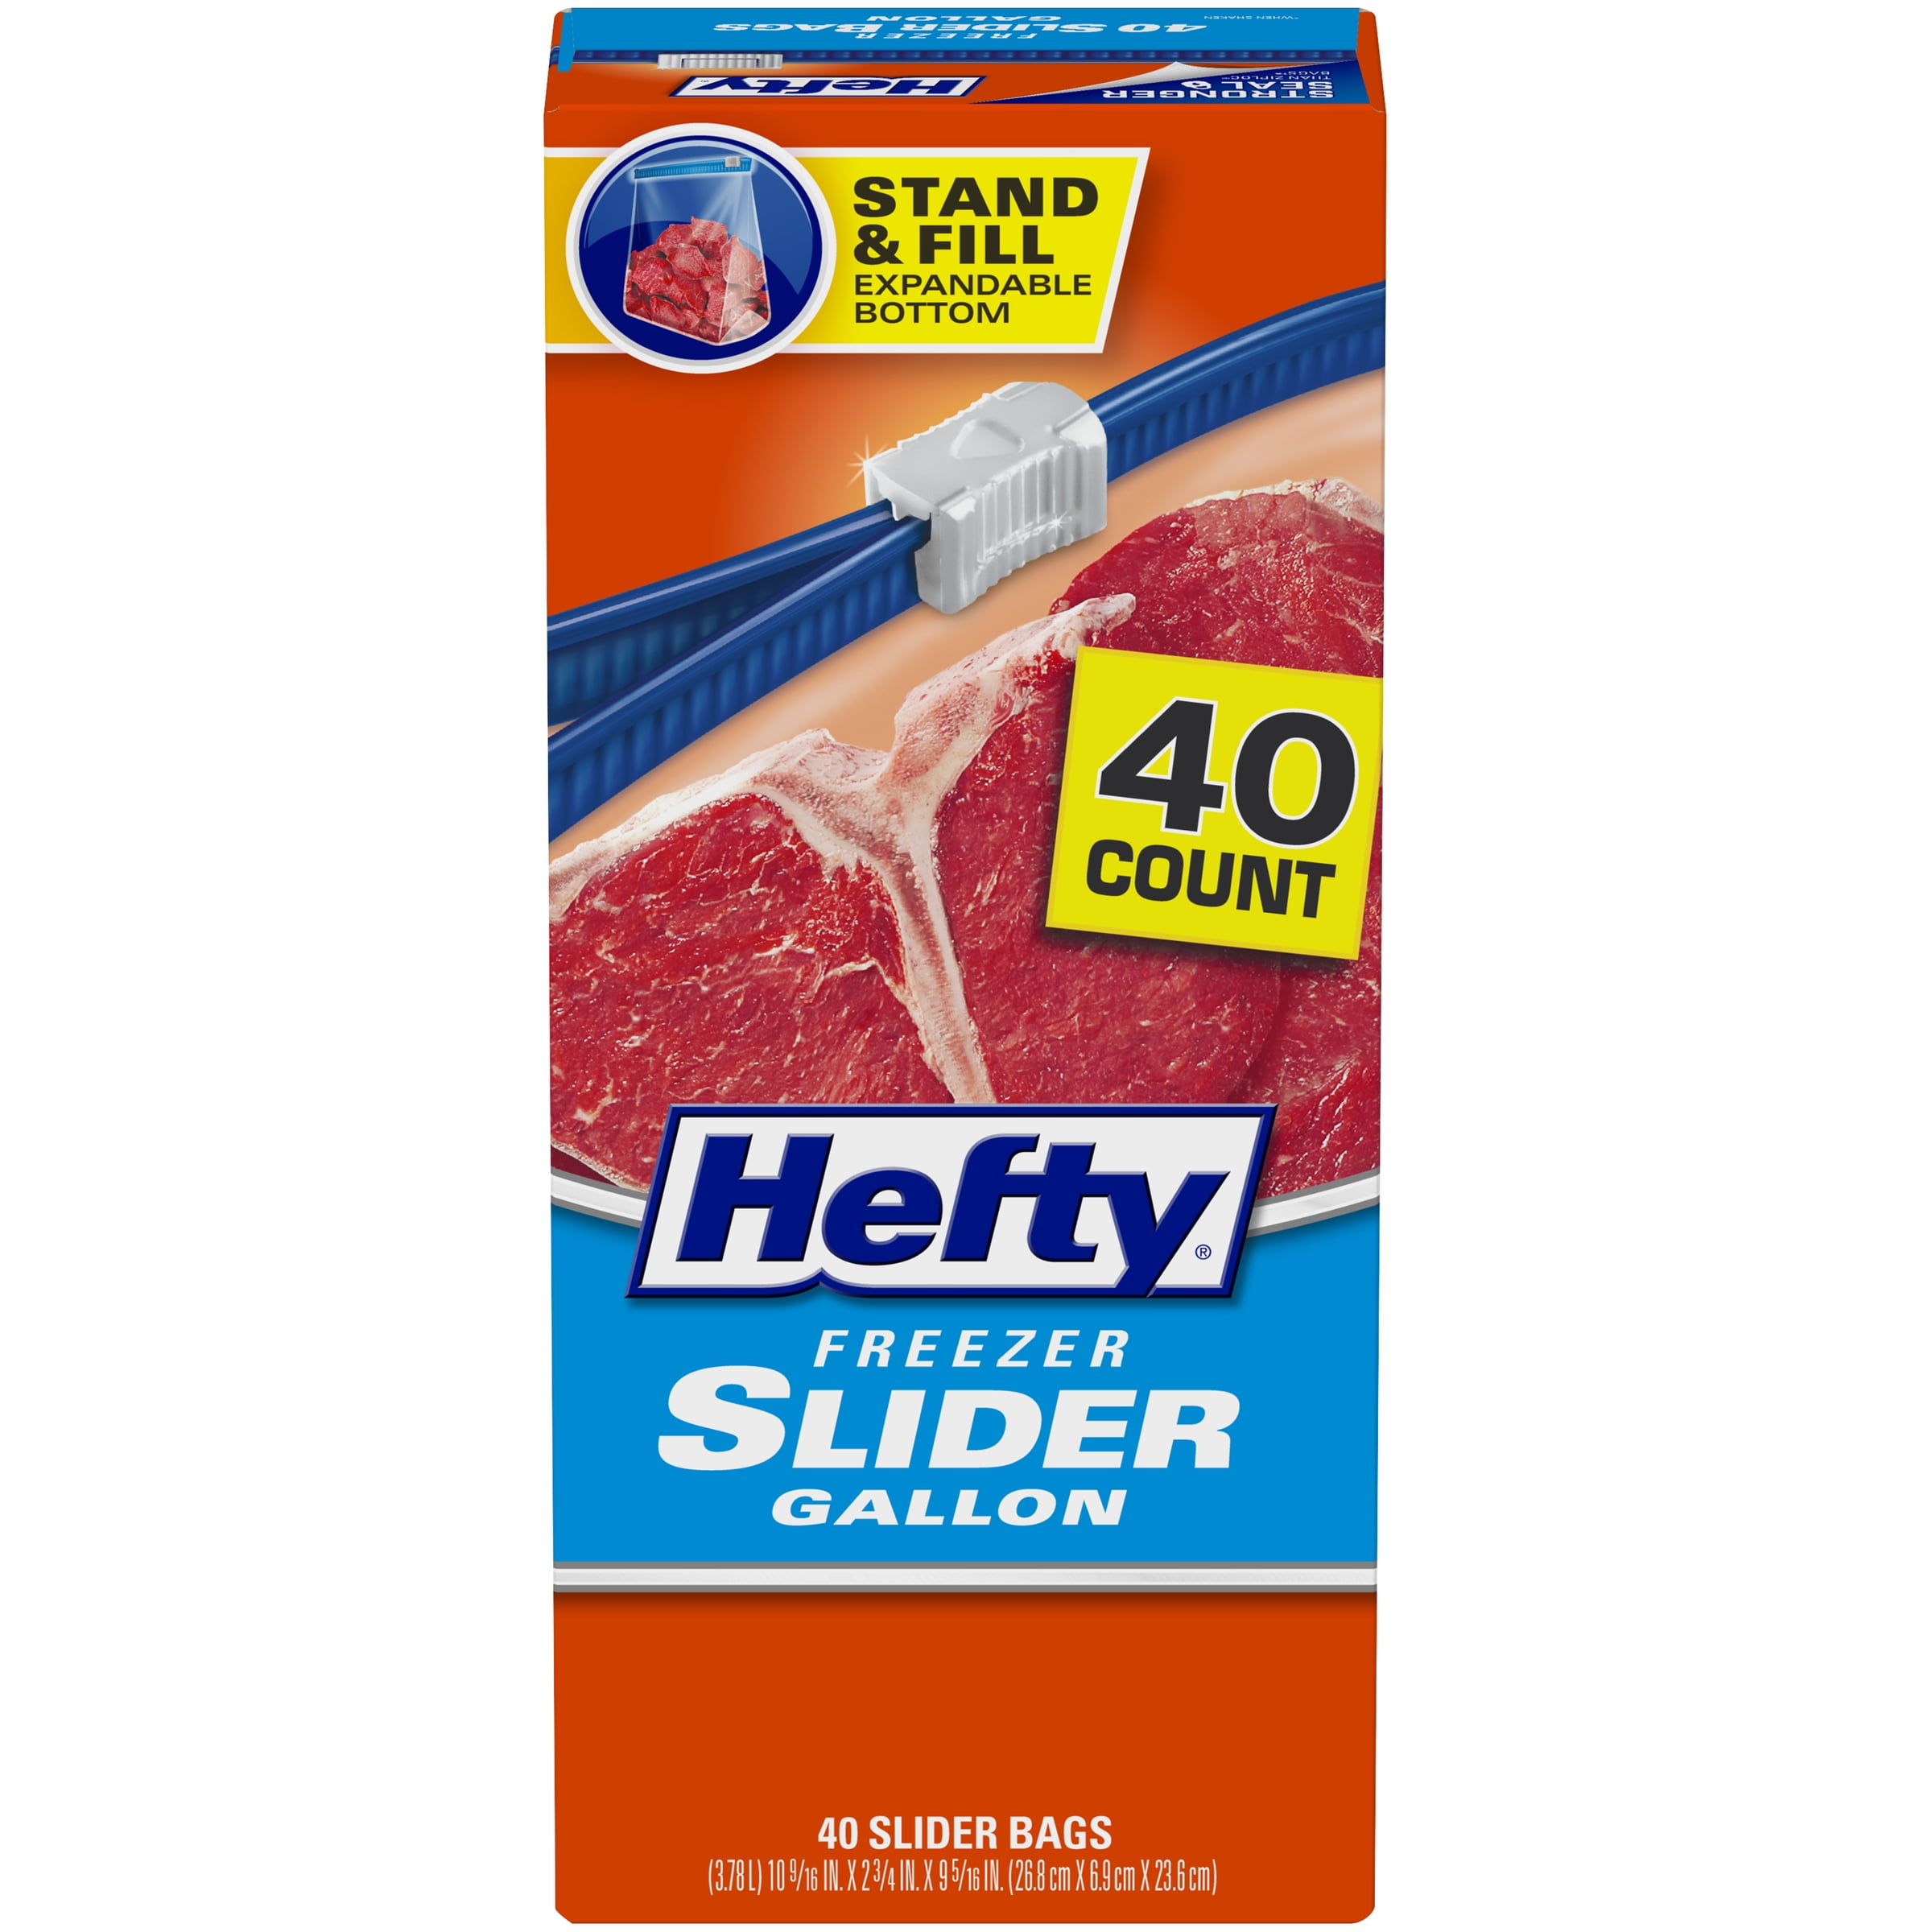 112 Count Total Hefty Slider Freezer Storage Bags Gallon Size Pack of 2 56 Count 